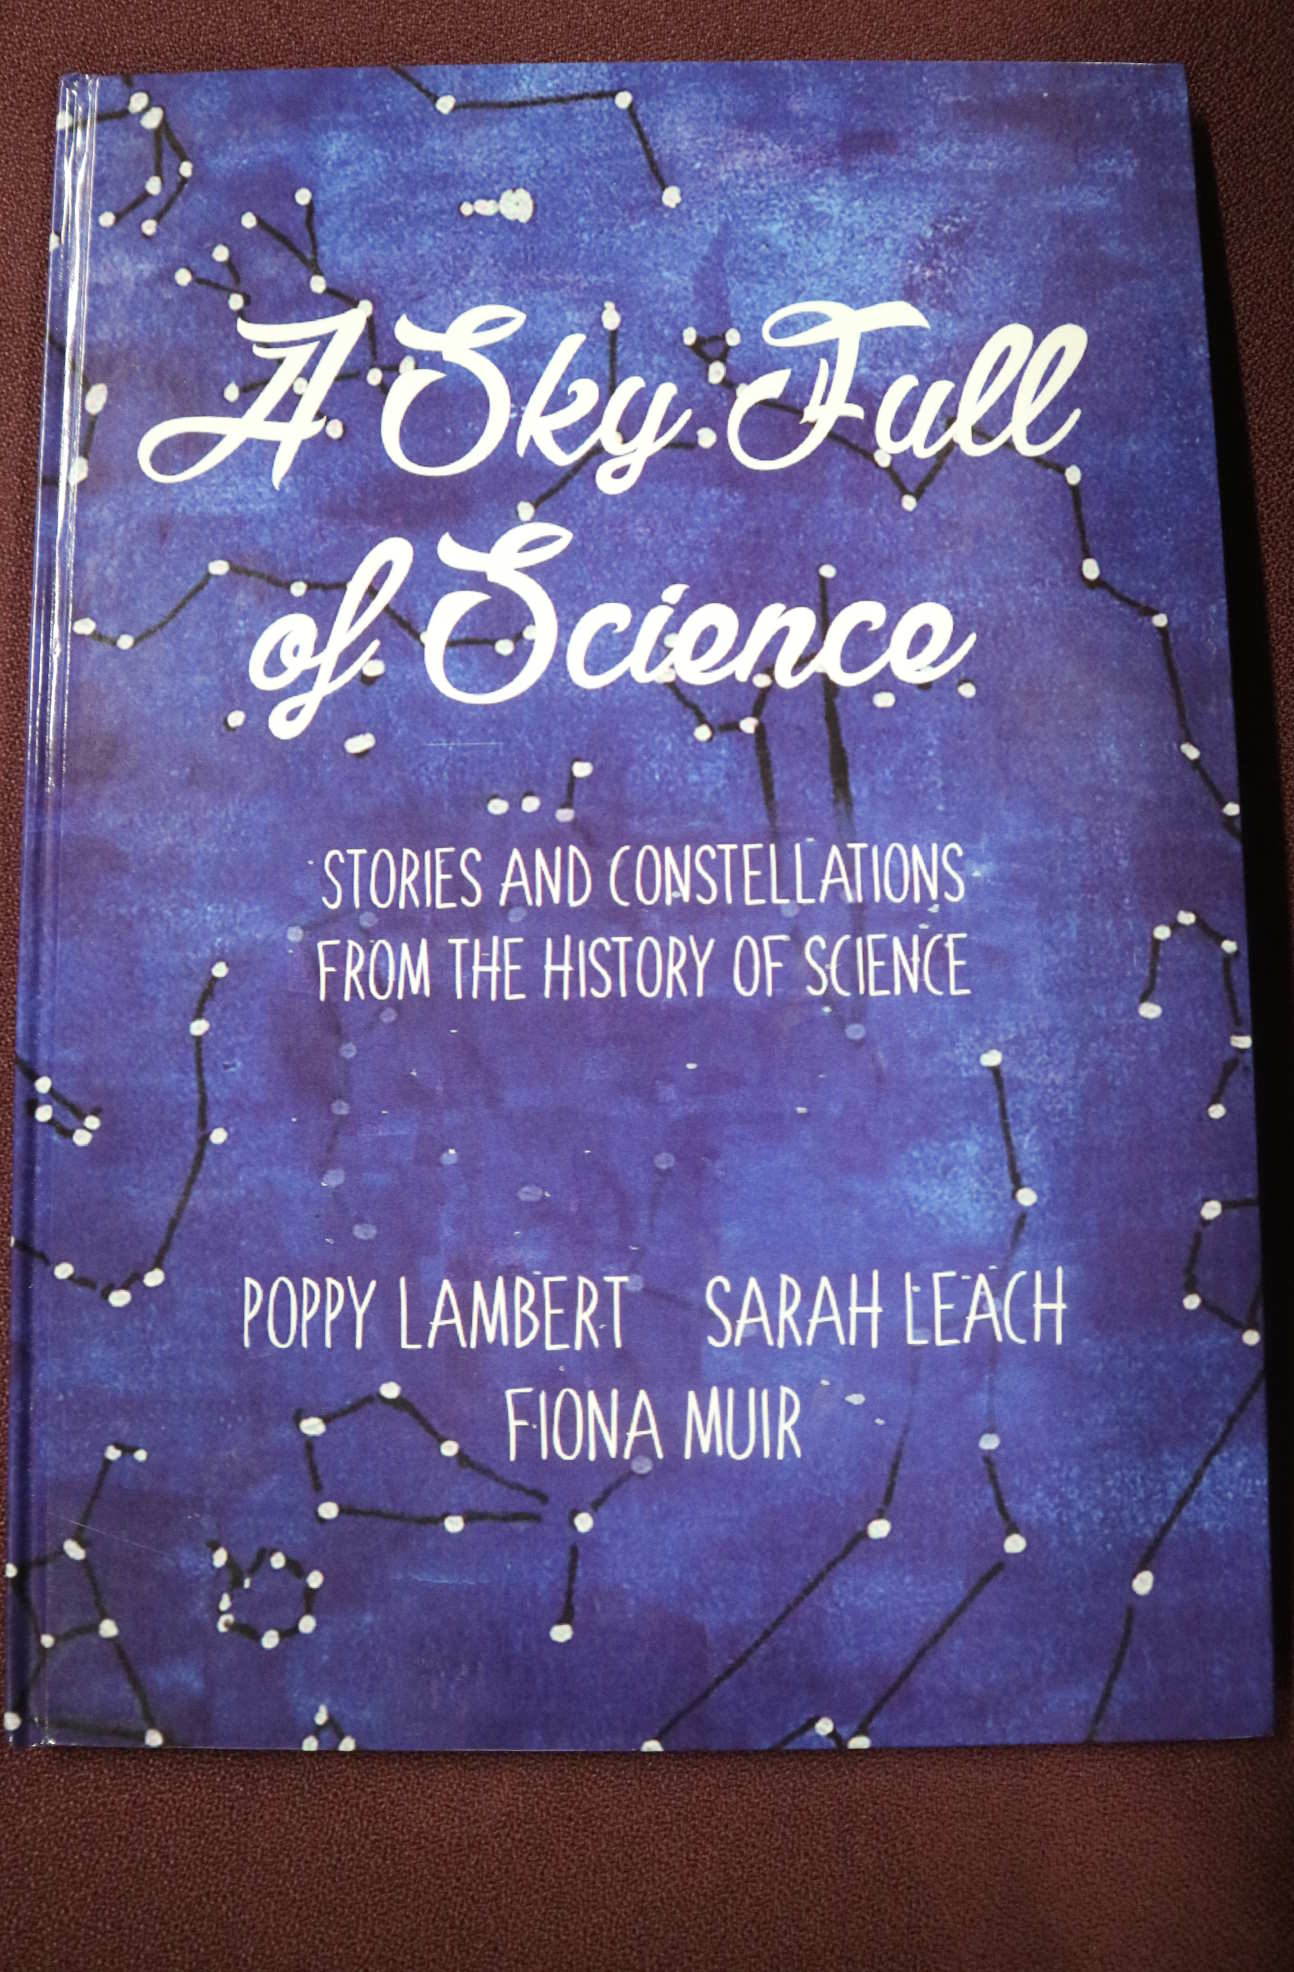 A book with the title 'A sky full of science'